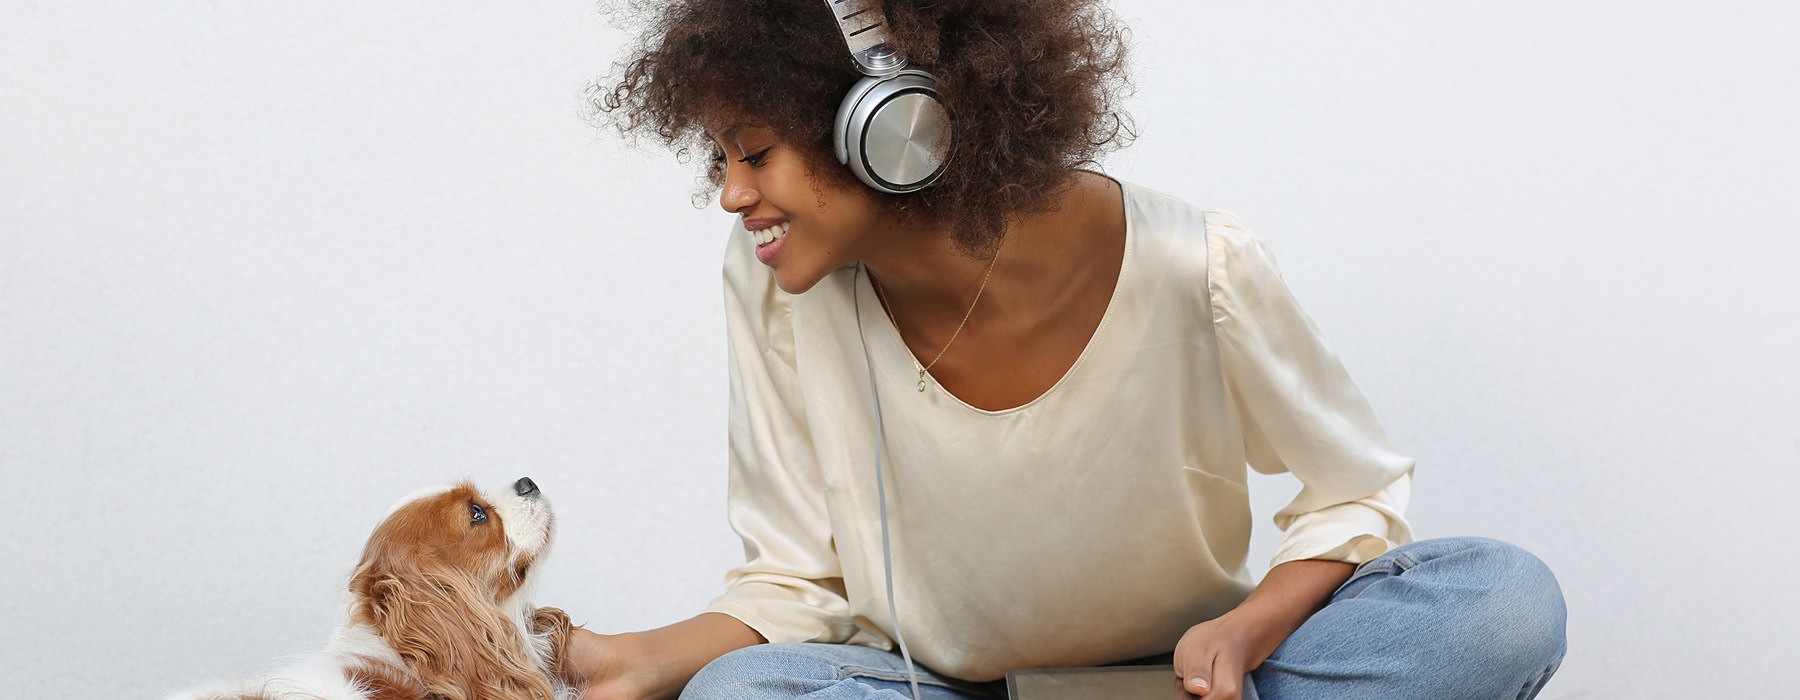 woman with headphones on smiles at her puppy